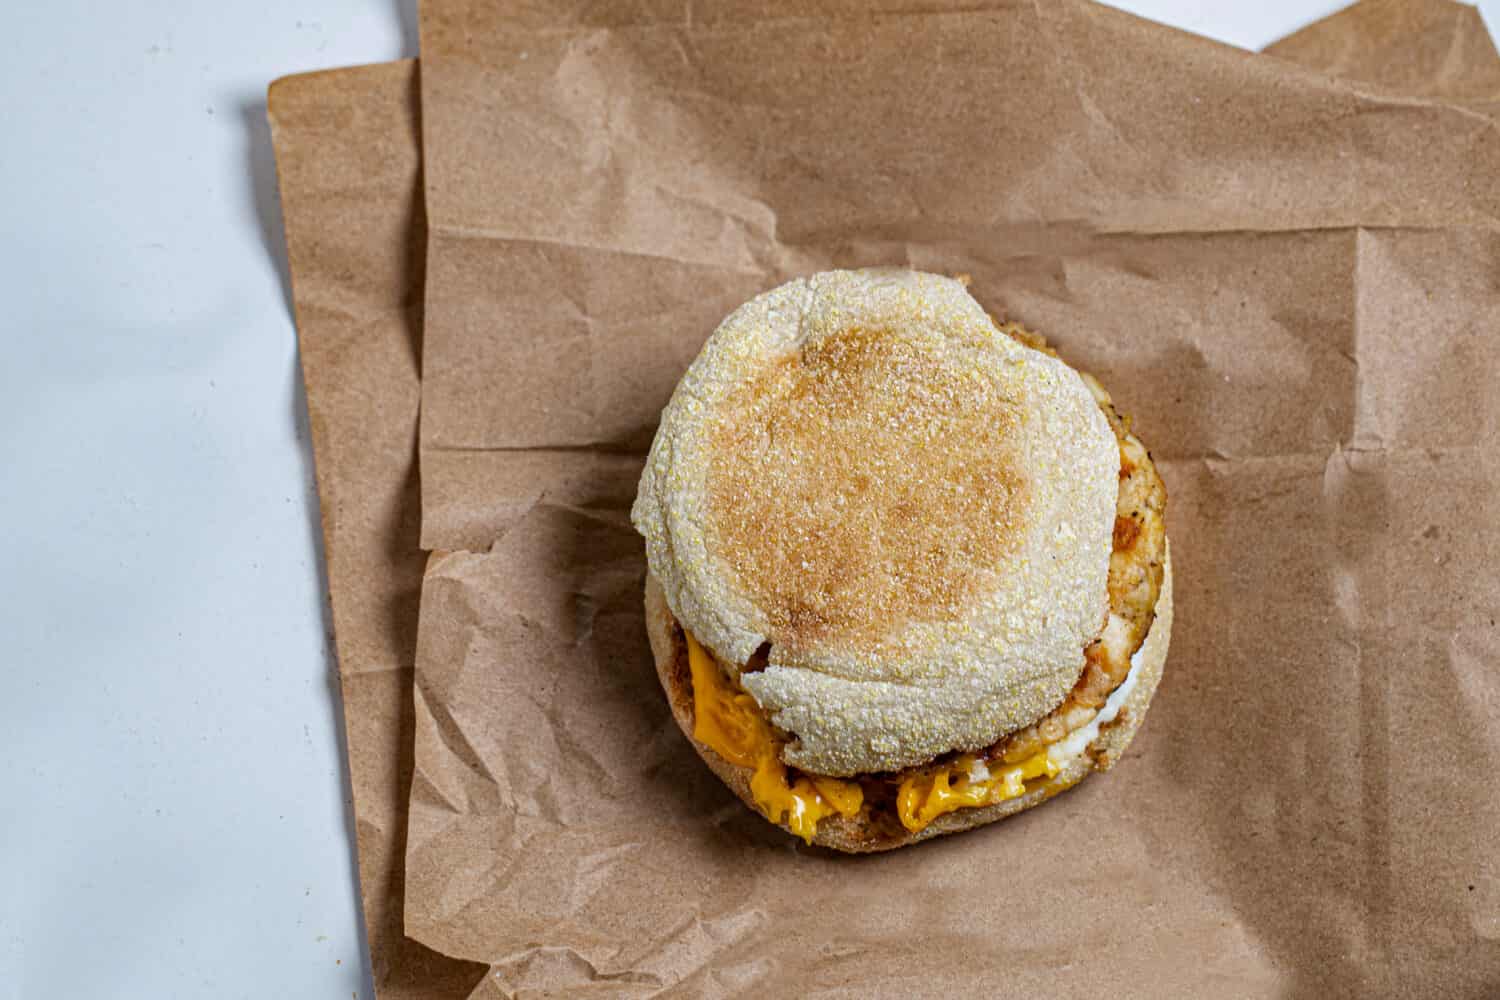 Chicken Burger and Sausage McMuffin. - Image